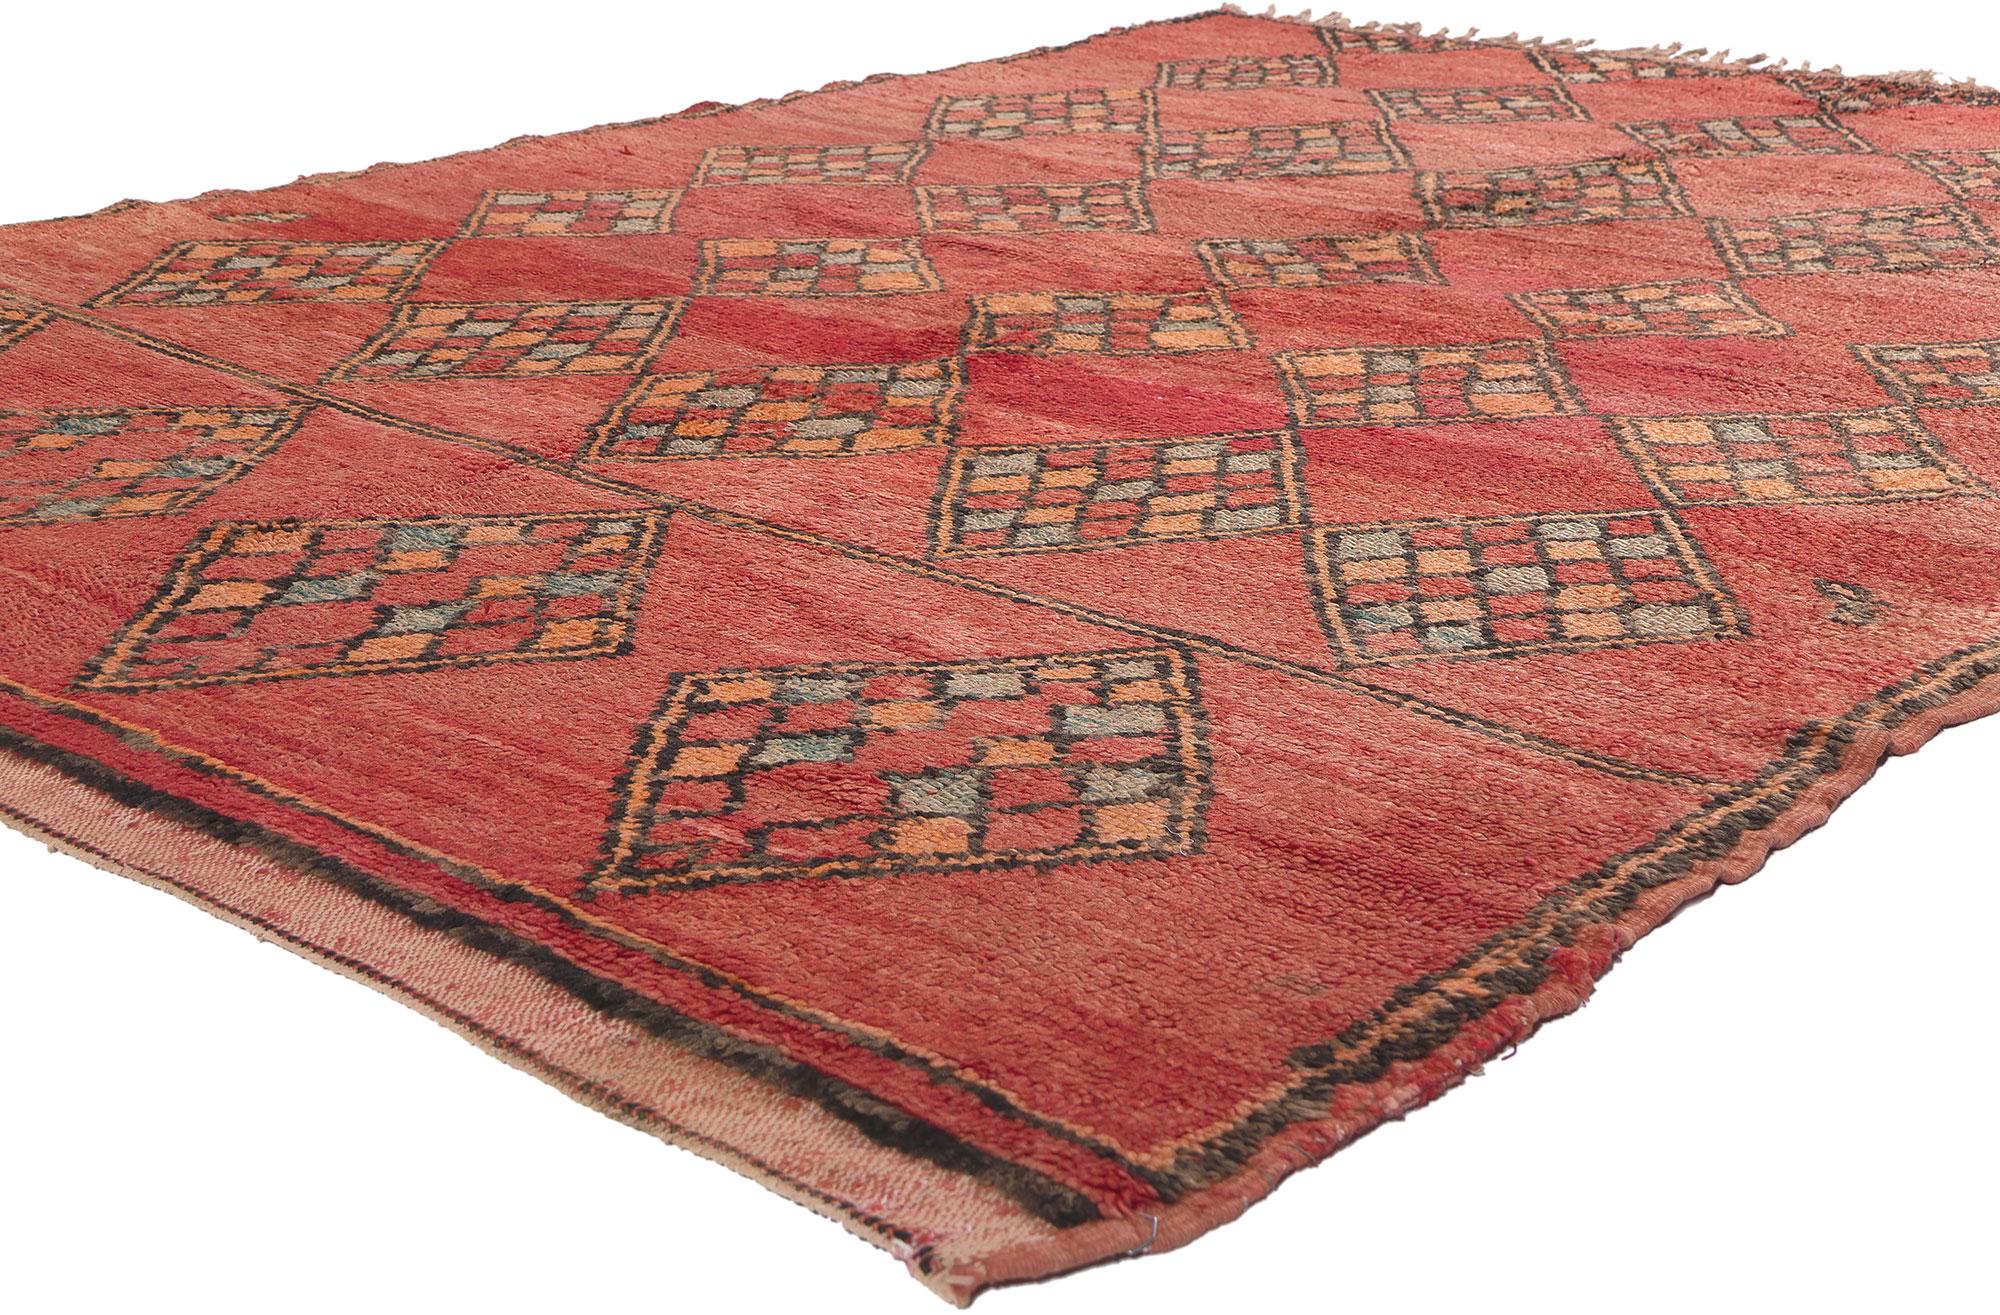 20171 Vintage Red Boujad Moroccan Rug, 05'10 x 08'05. In the realm of Bohemian interior style, discover the enchanting fusion with nomadic charm in this hand-knotted wool vintage Boujad Moroccan rug. The captivating diamond design and vibrant